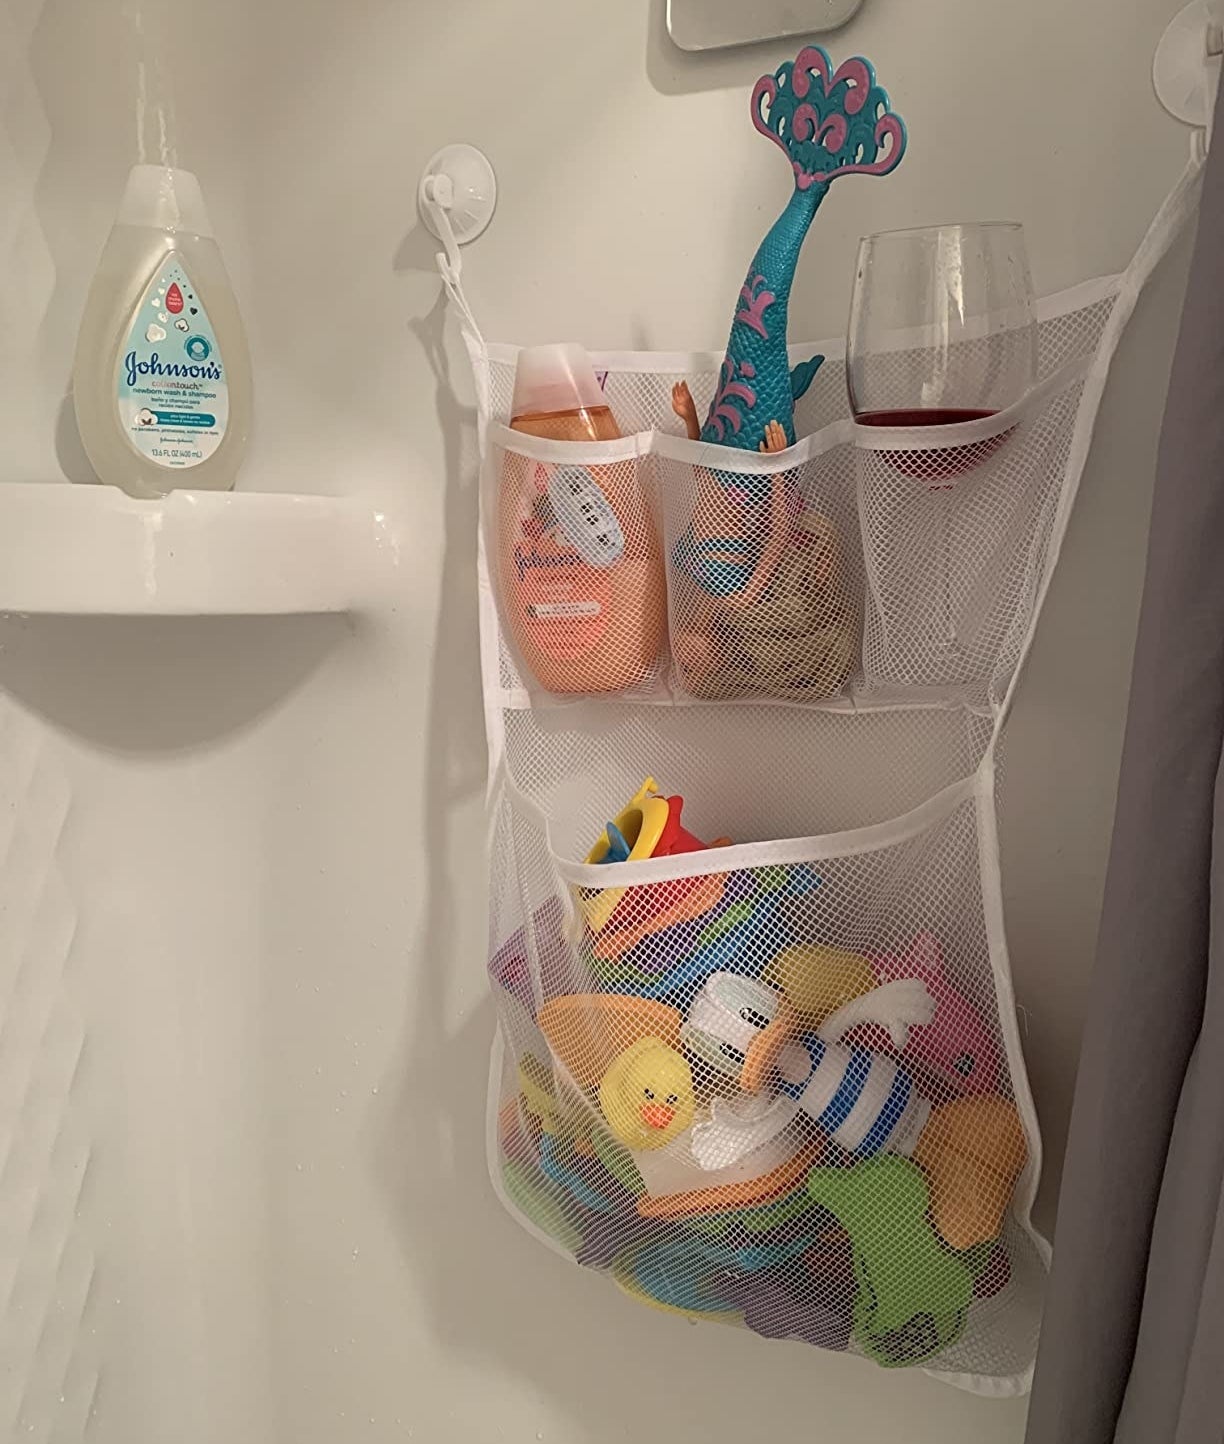 a reviewer photo of the toy organizer hanging in the shower with toys and a wine glass inside